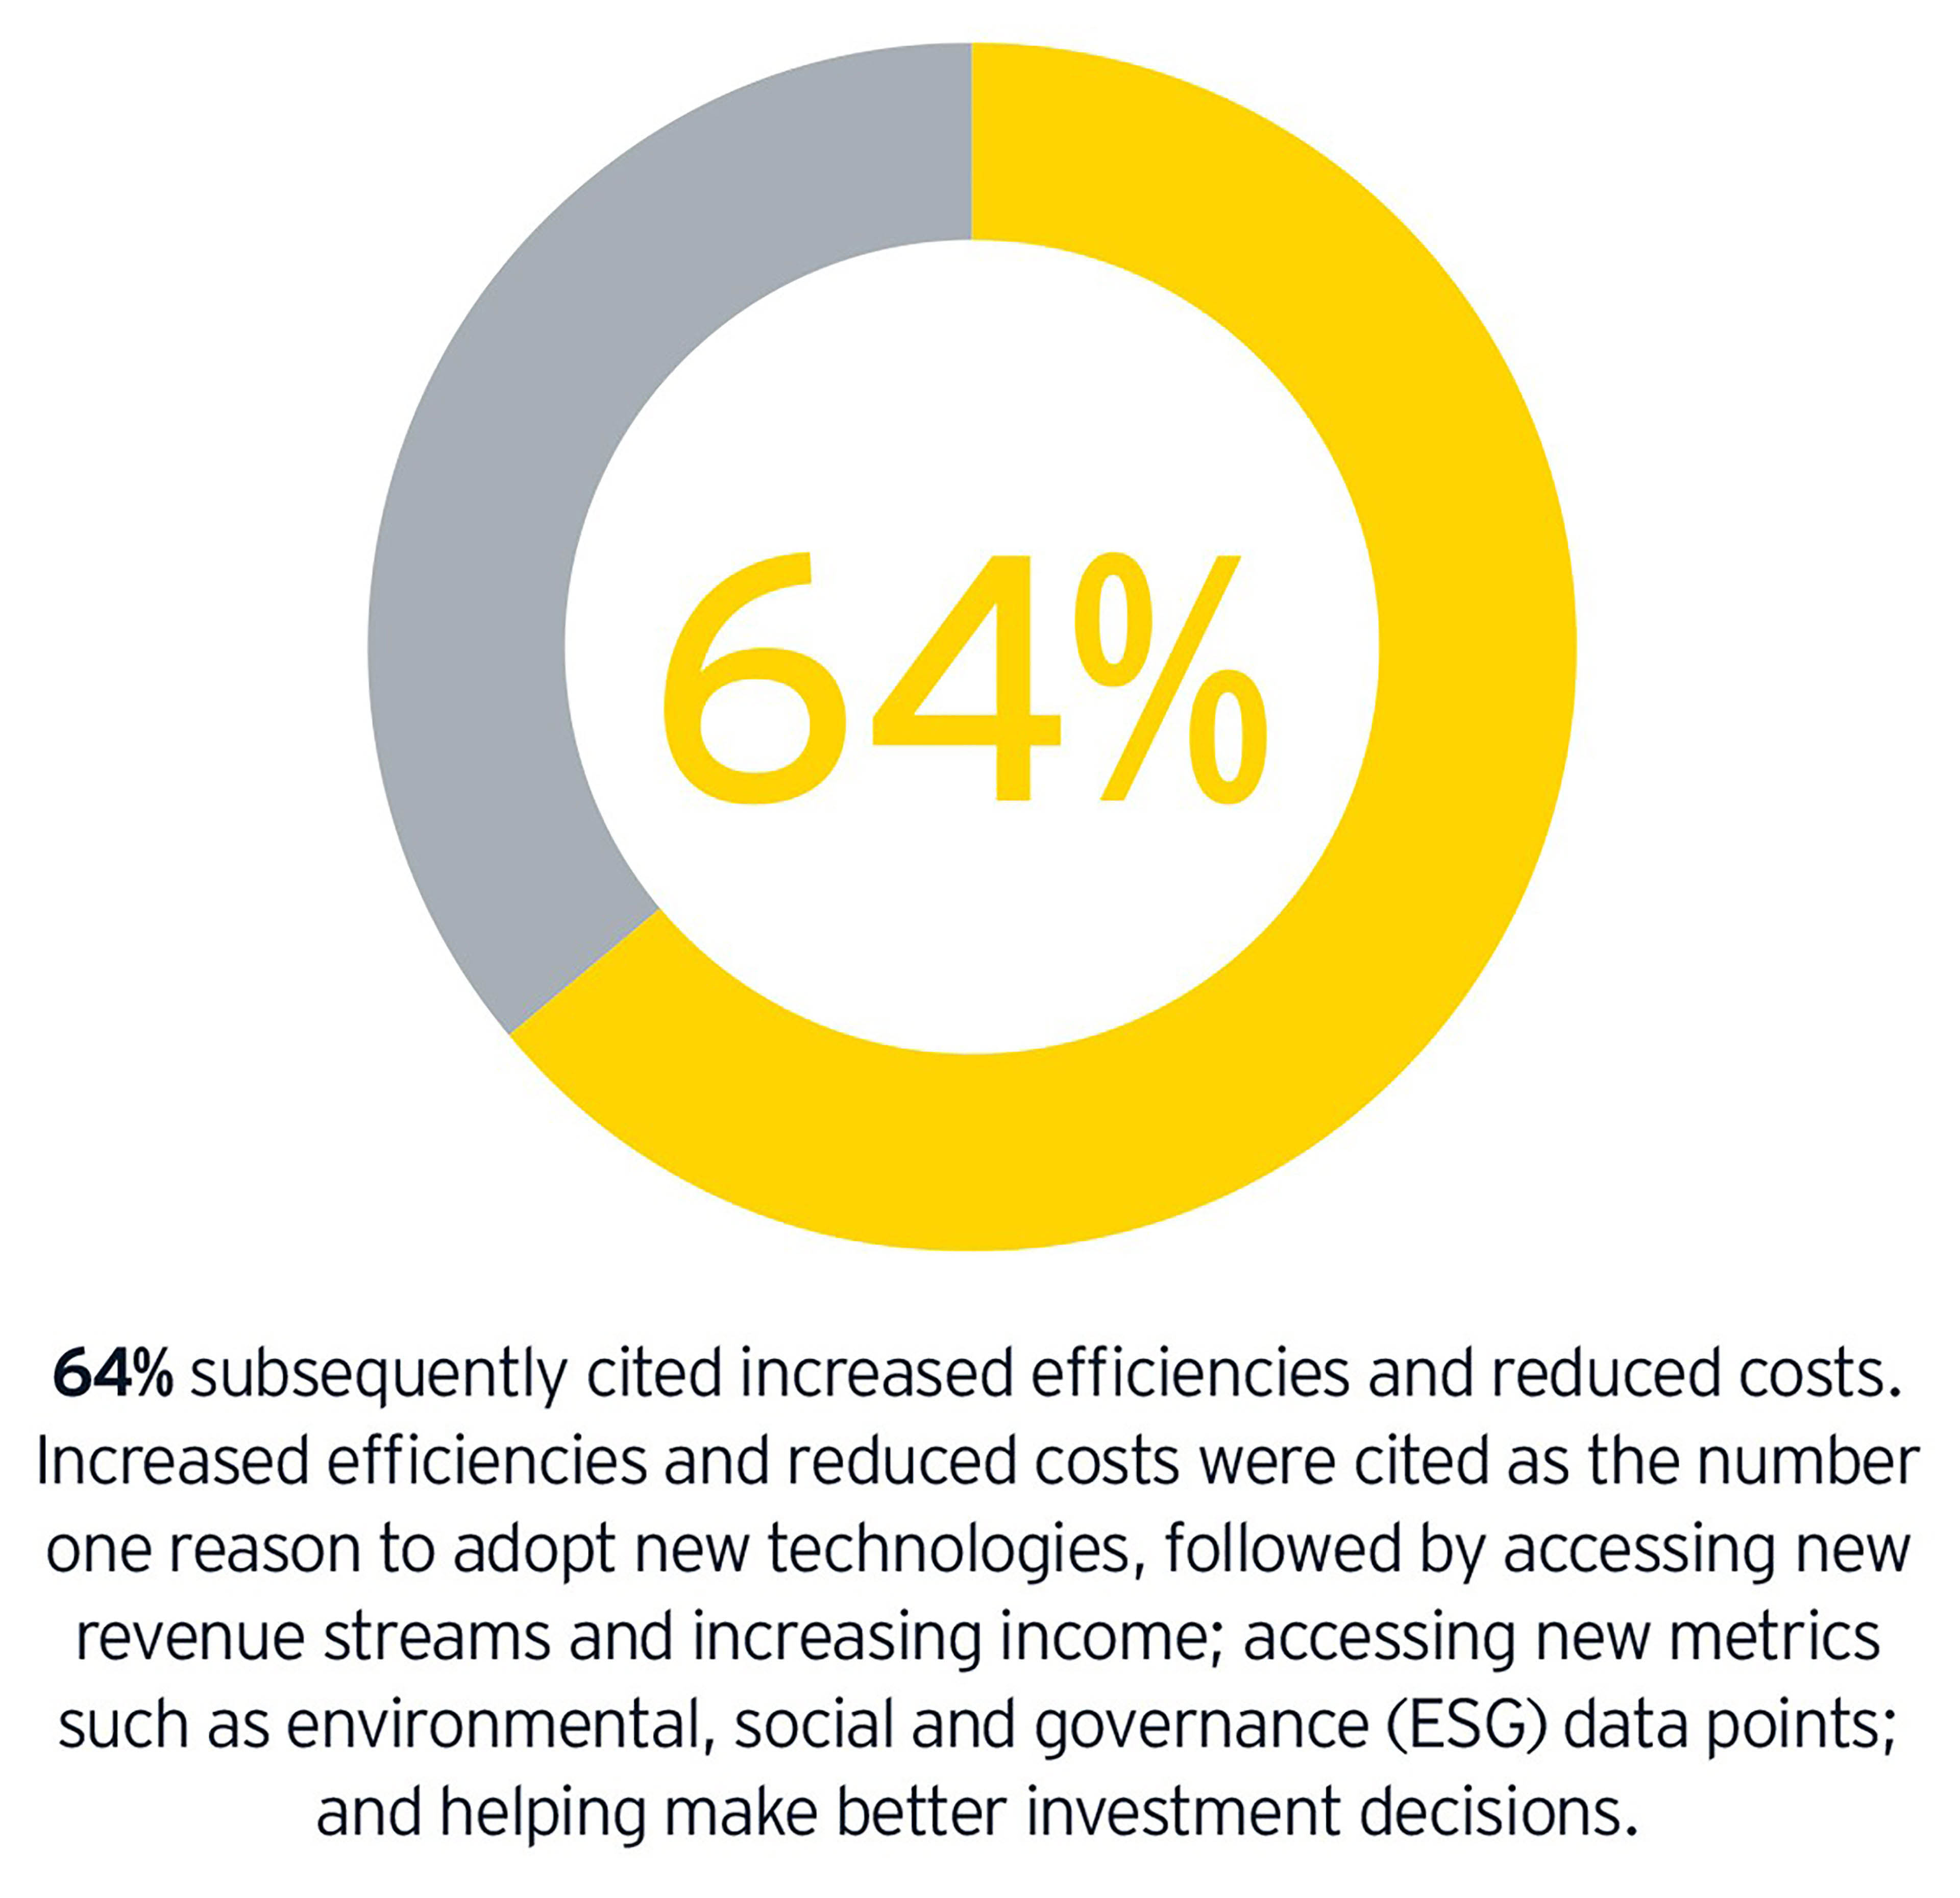 64 percent subsequently cited increased efficiencies and reduced costs